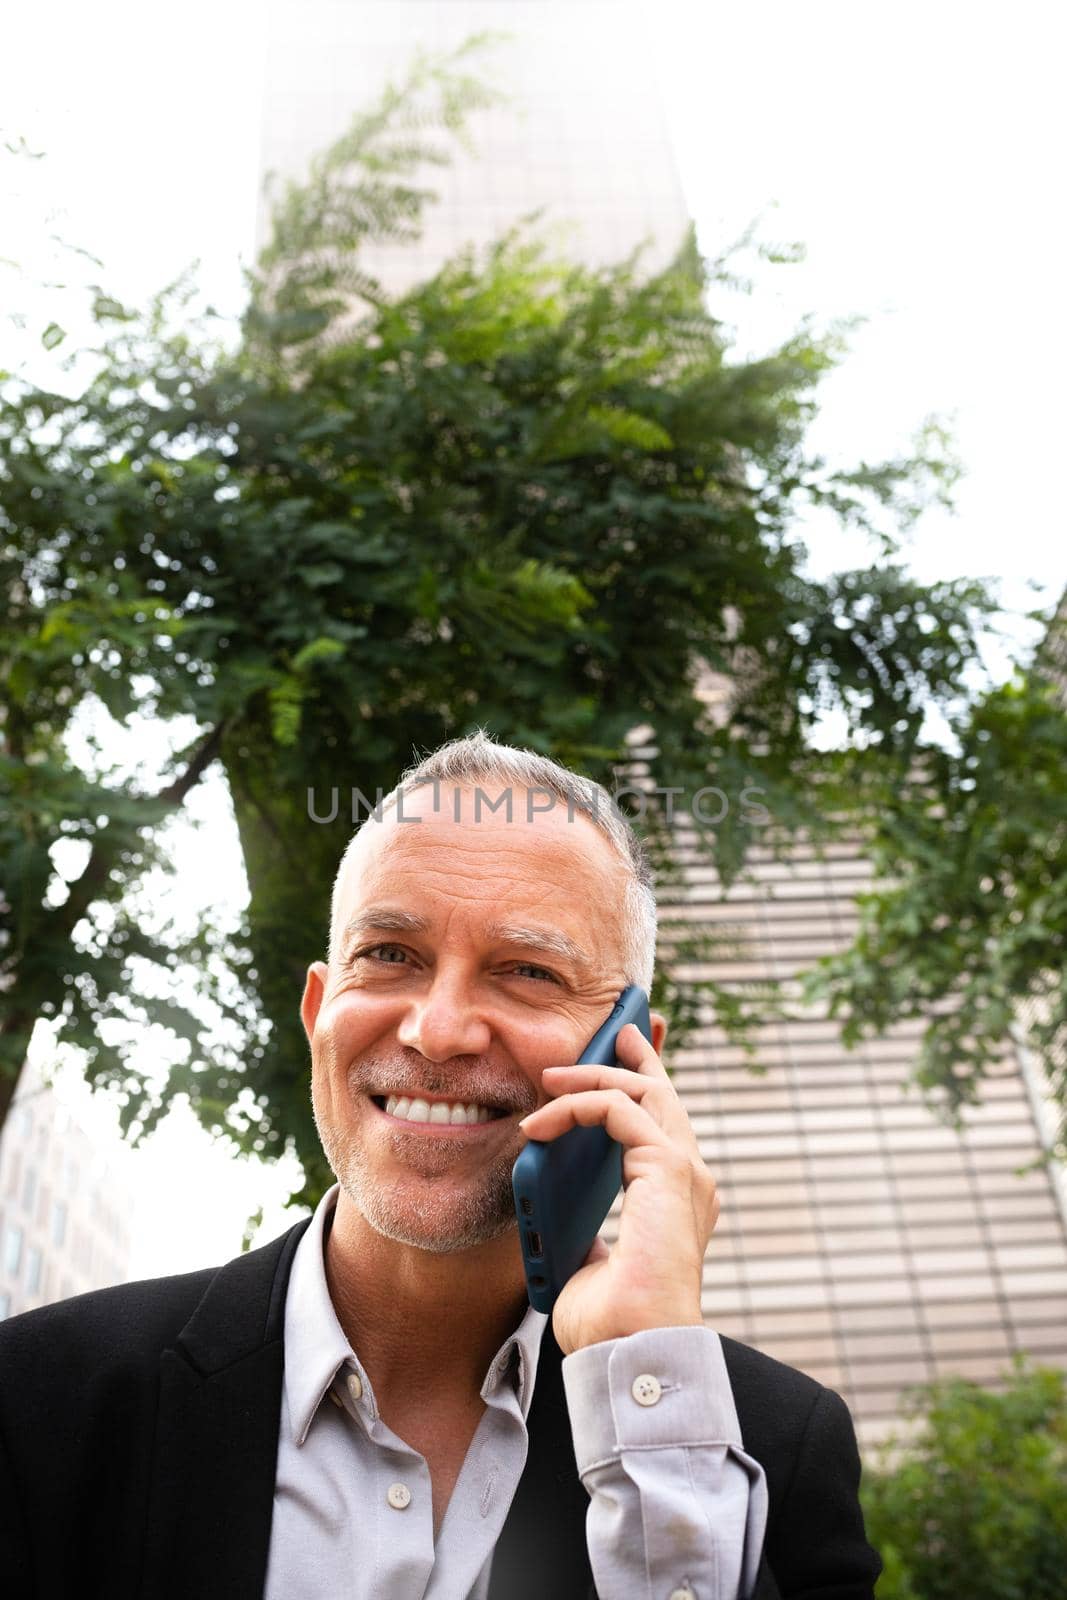 Caucasian man with grey hair talking with mobile phone looking at camera in the city. Copy space. Vertical image. Business and technology concept.